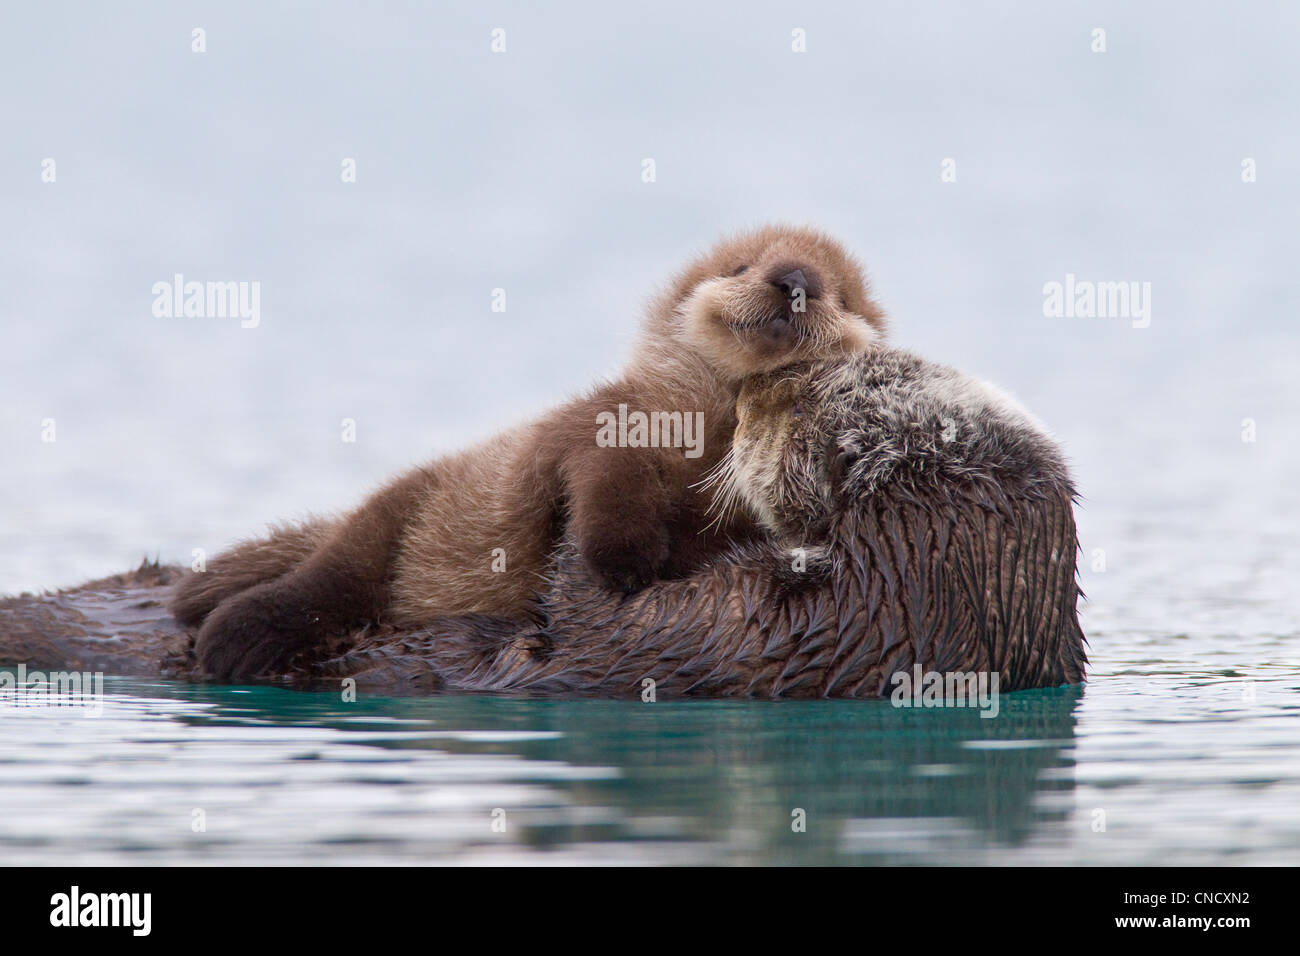 Female Sea otter with newborn pup riding on her stomach, Prince William Sound, Southcentral Alaska, Winter Stock Photo